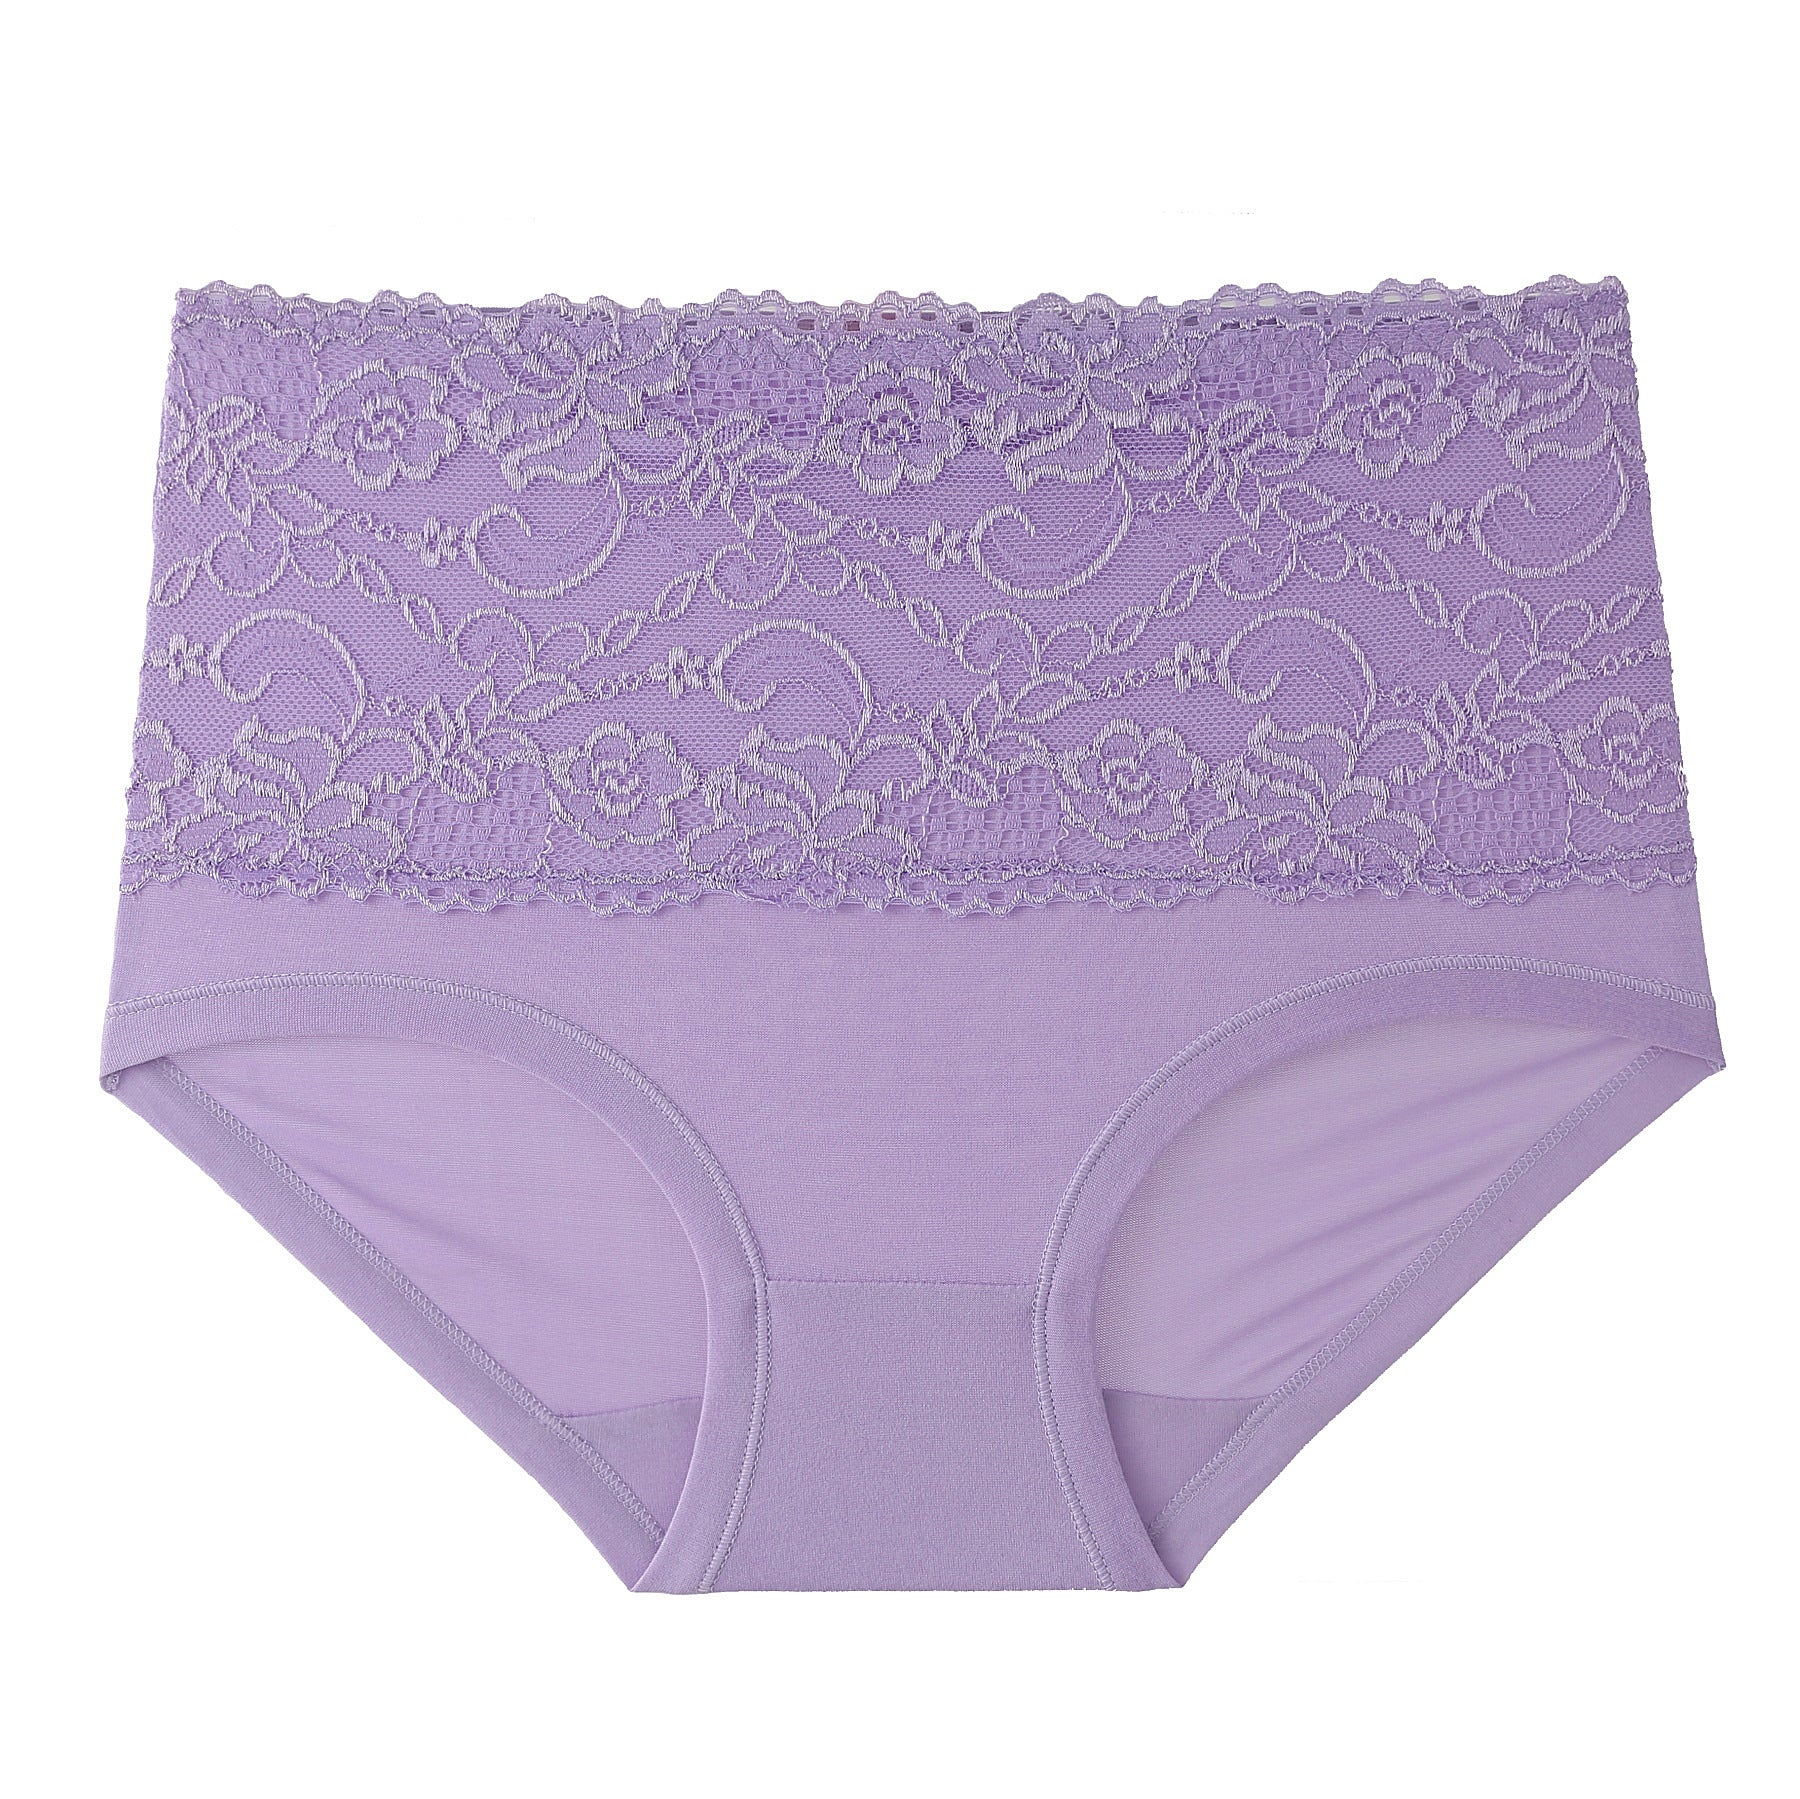 TCT In-shape High Rise Panty - Set of 2 – The Comfort Theory